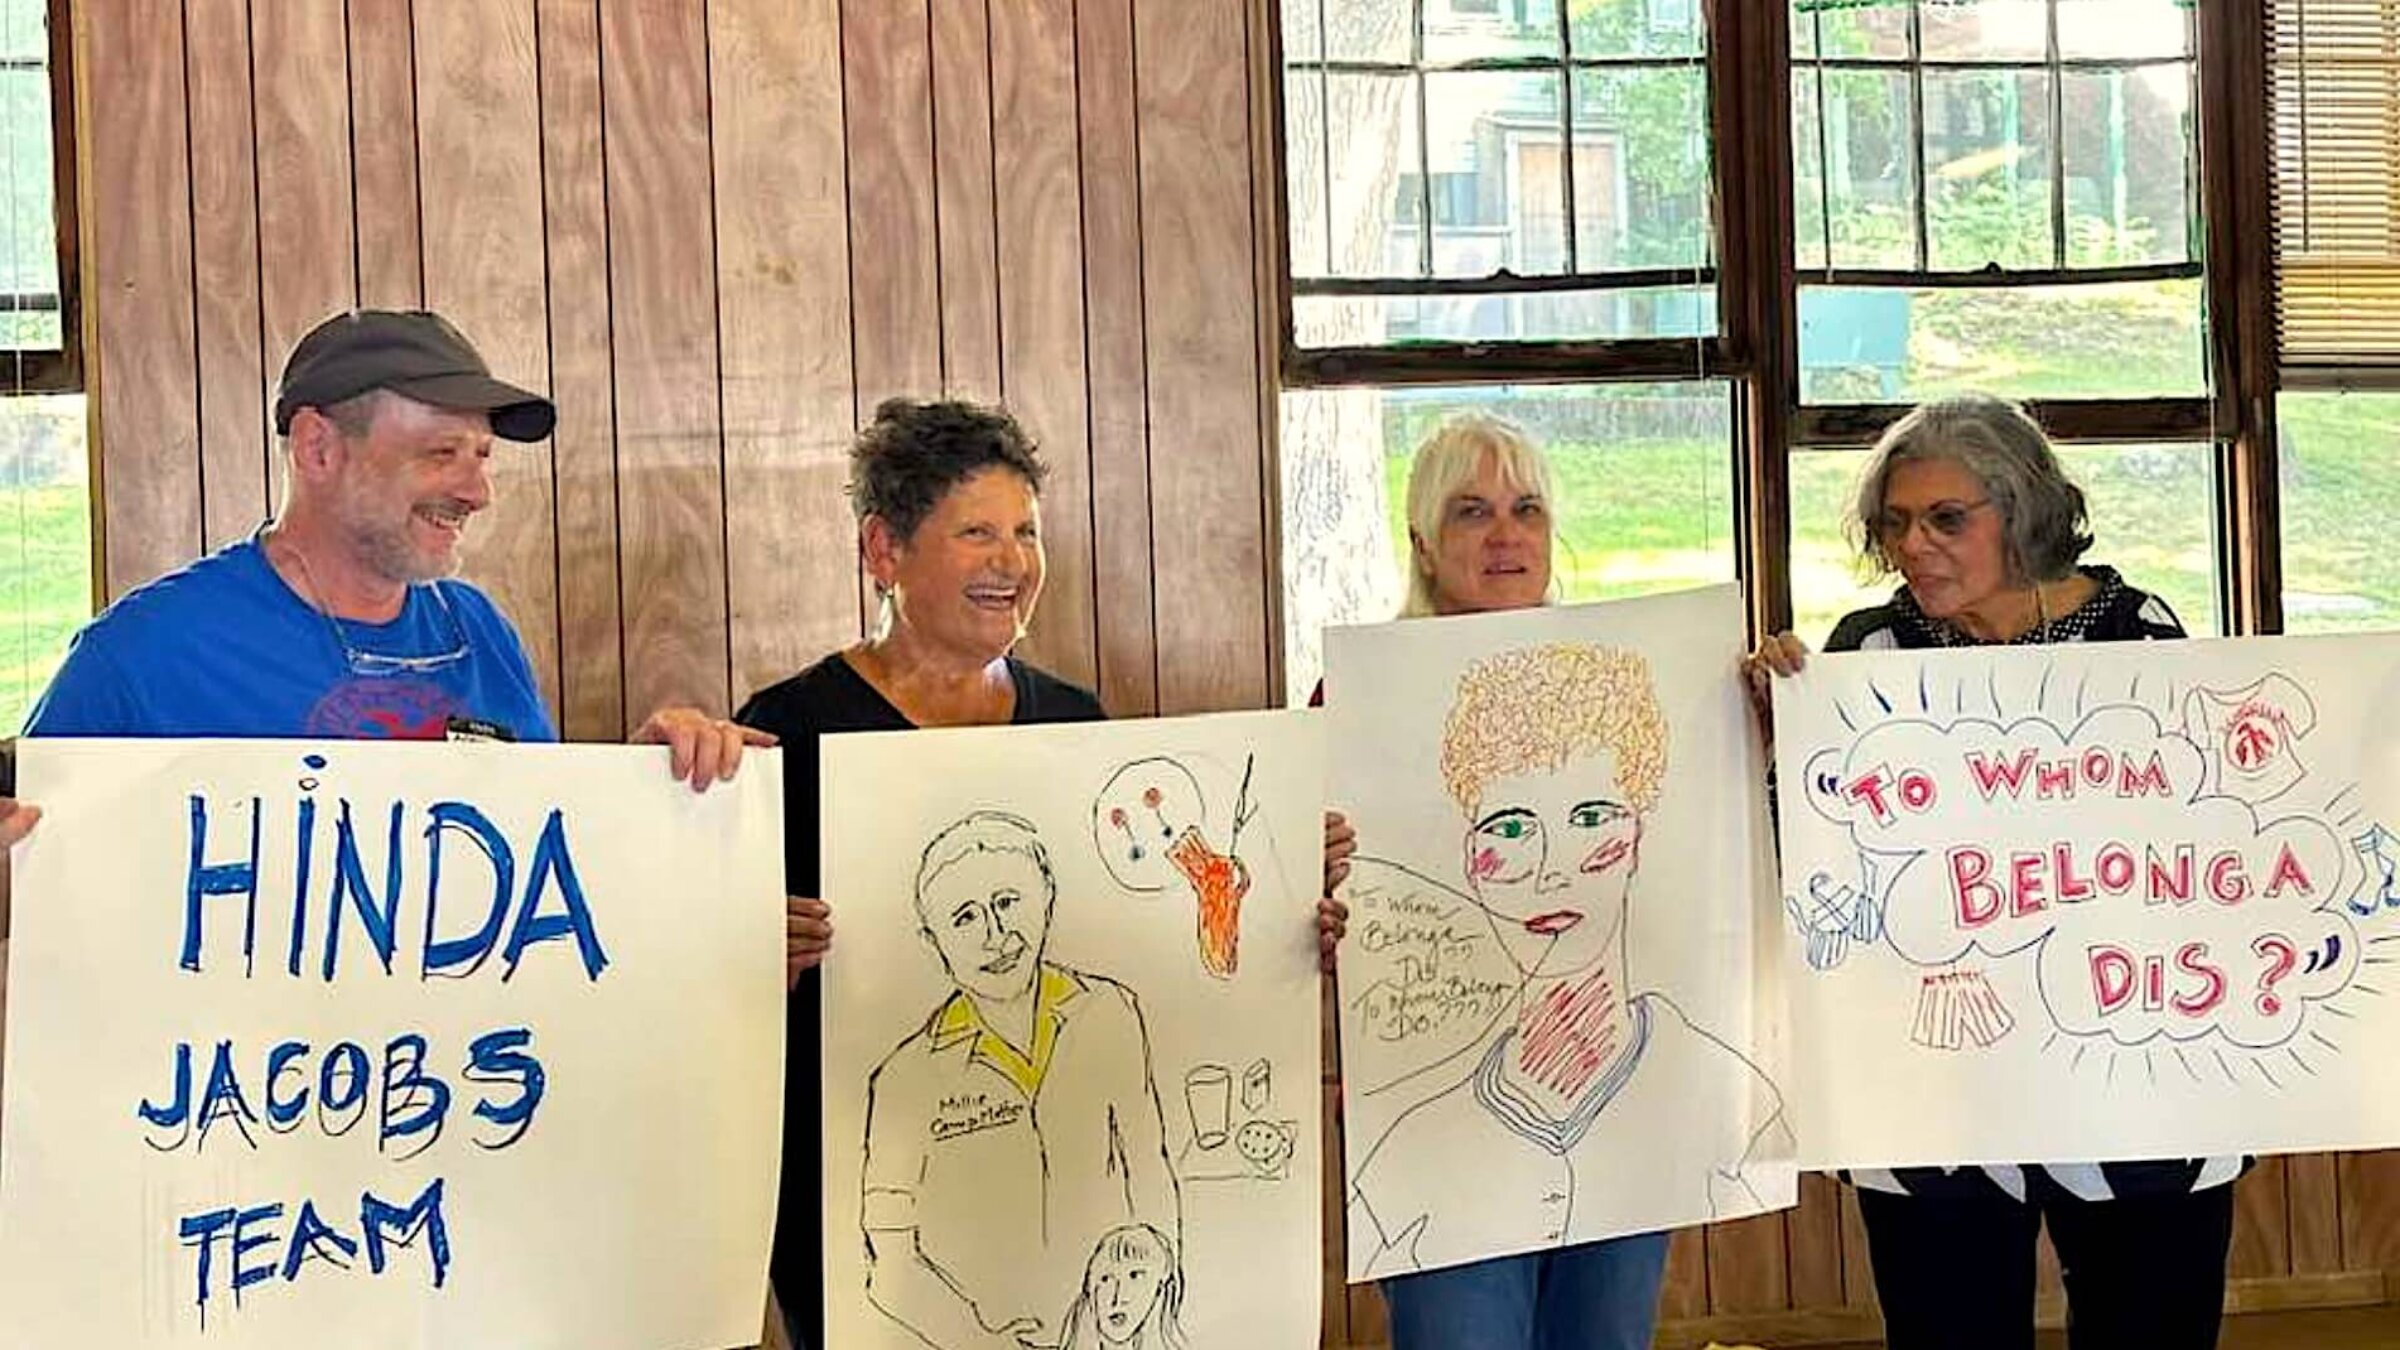 Members of the Hinda Jacobs team display the posters they had created, during the Camp Hemshekh reunion